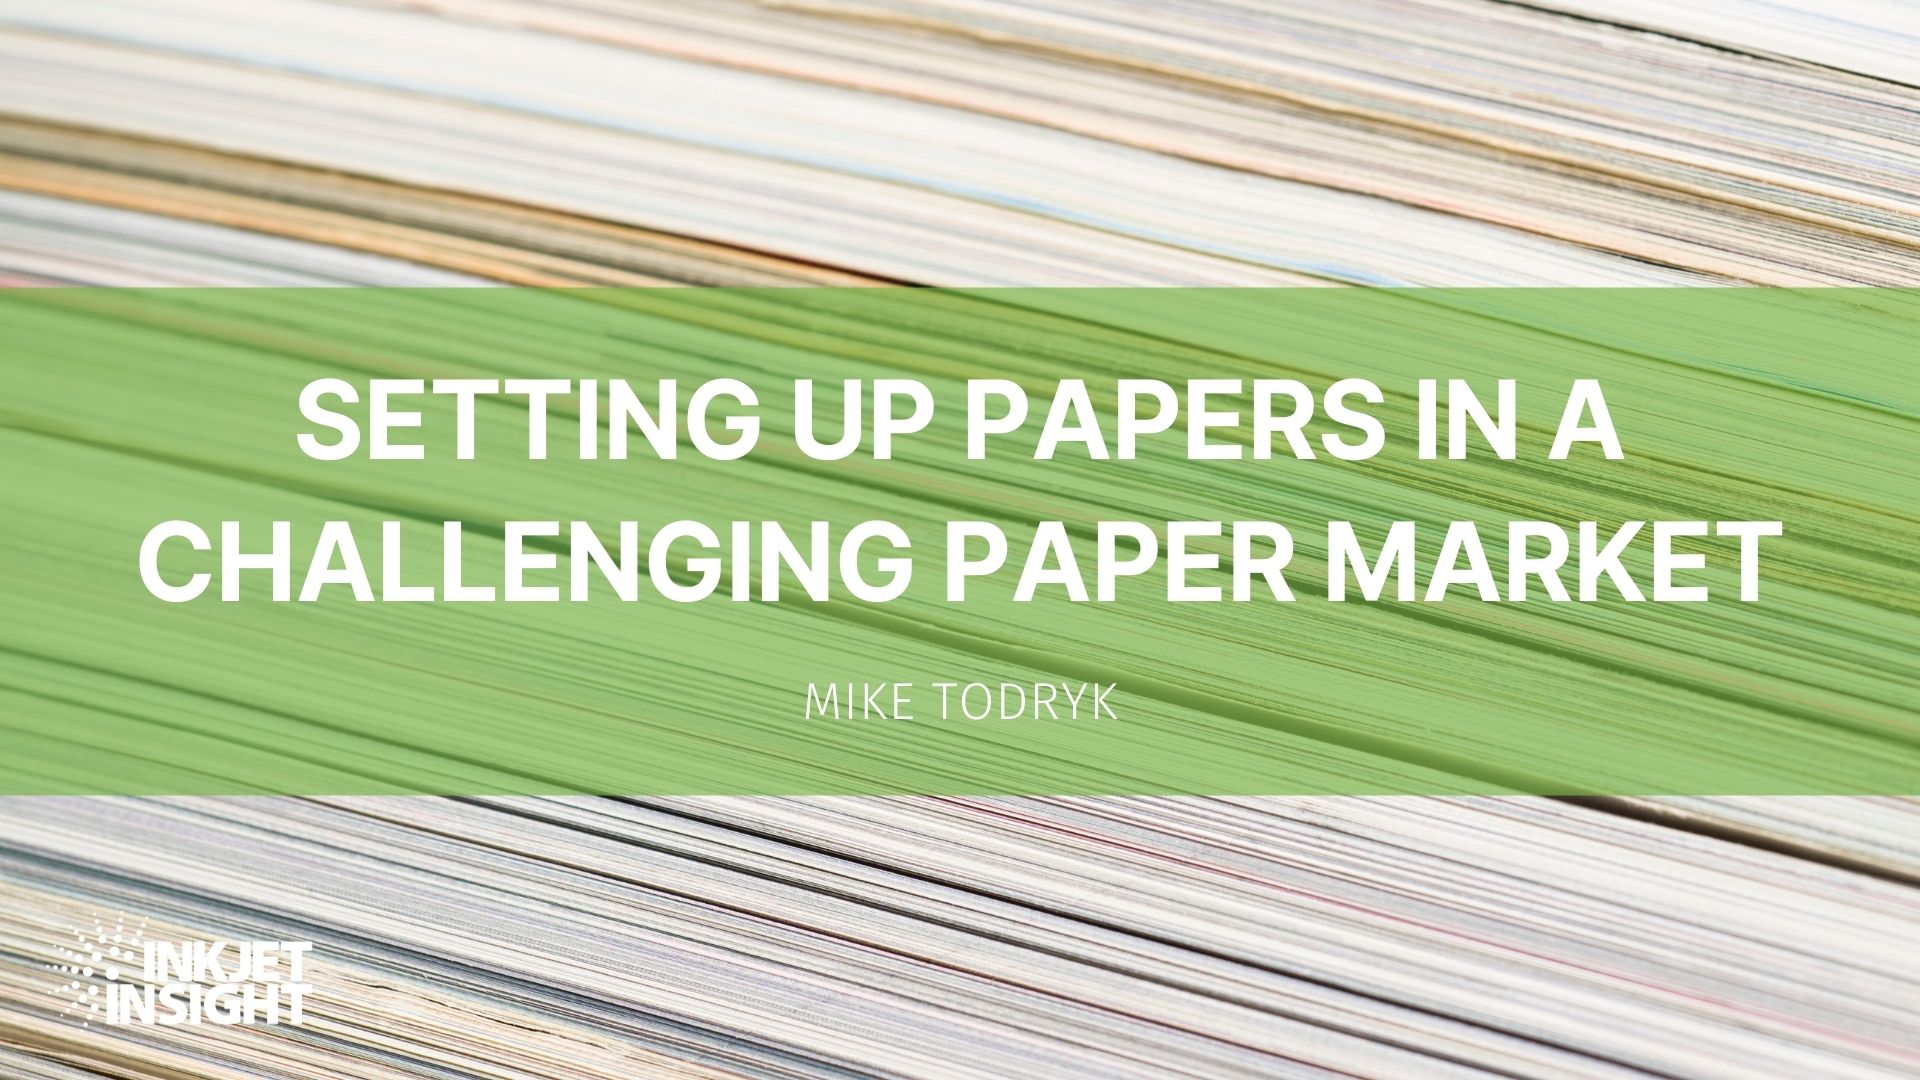 Featured image for “Setting Up Papers in a Challenging Paper Market”